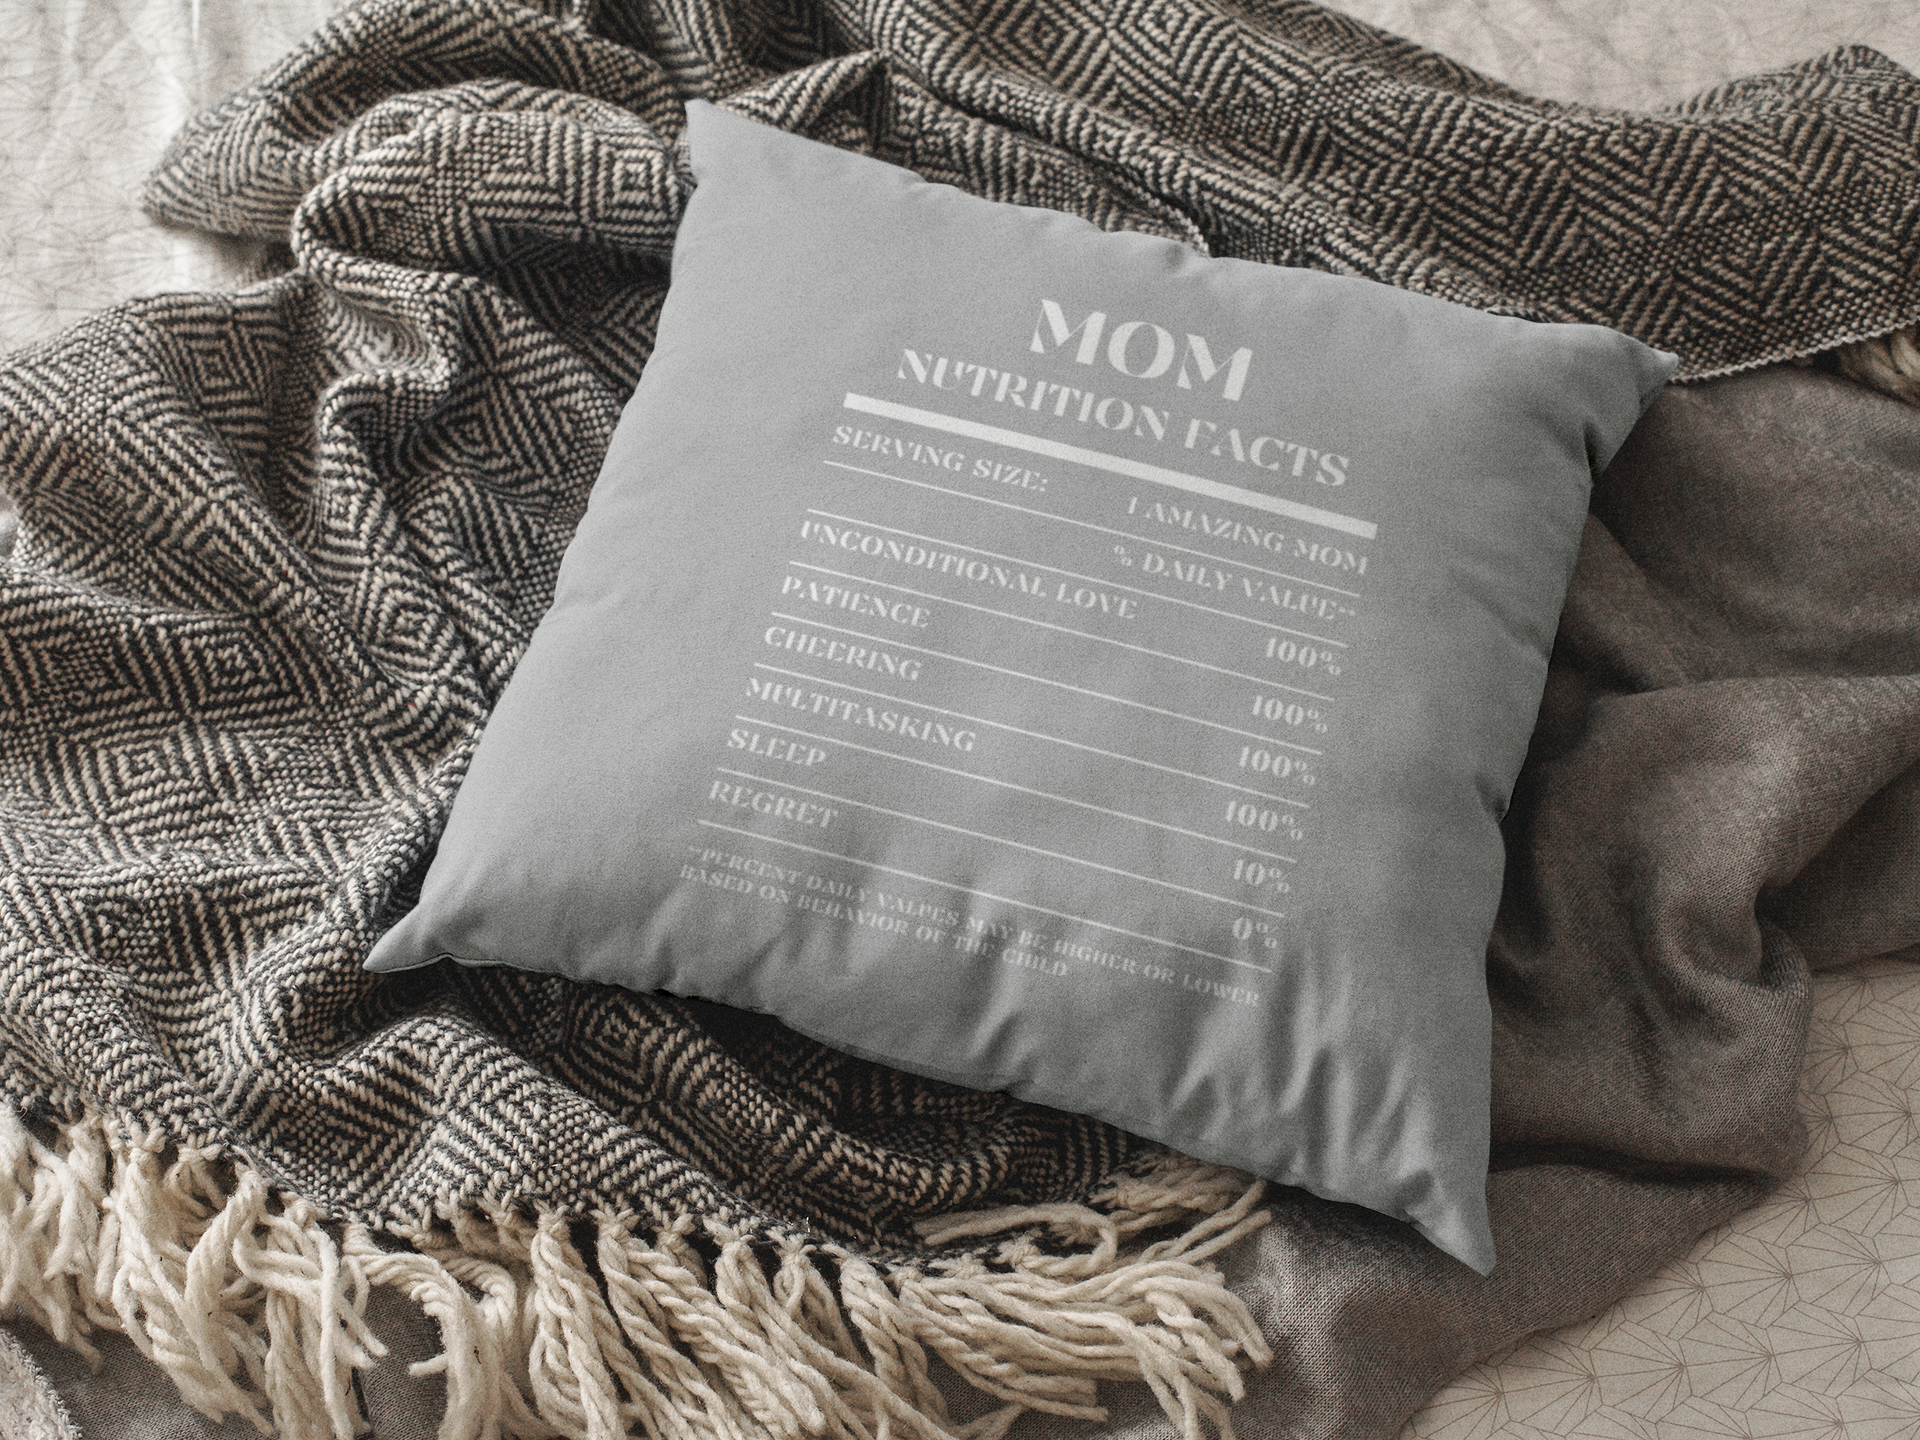 Nutrition Facts Pillow - Mom - White